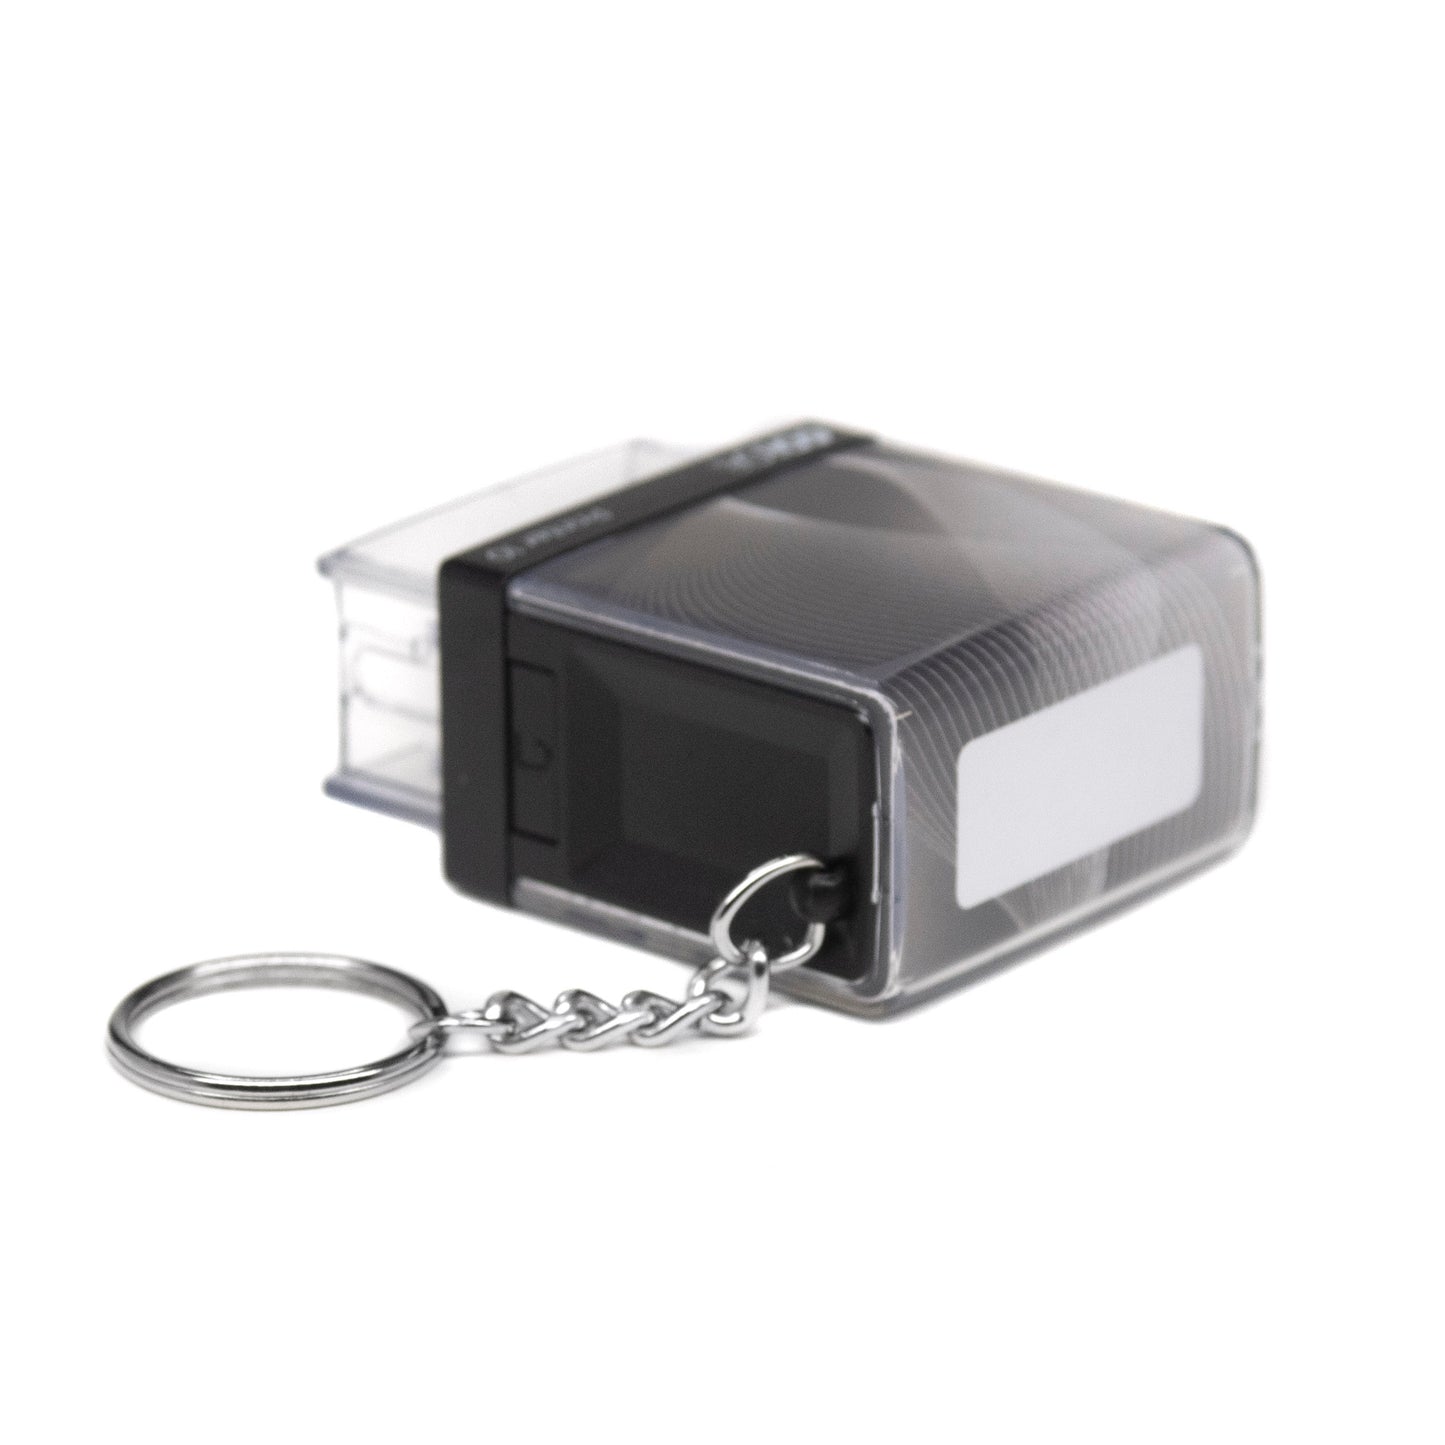 26mm x 9mm - Self-inking Personalised Keyring Key Ring Rubber Stamp With Black Ink - Two Lines Of Text